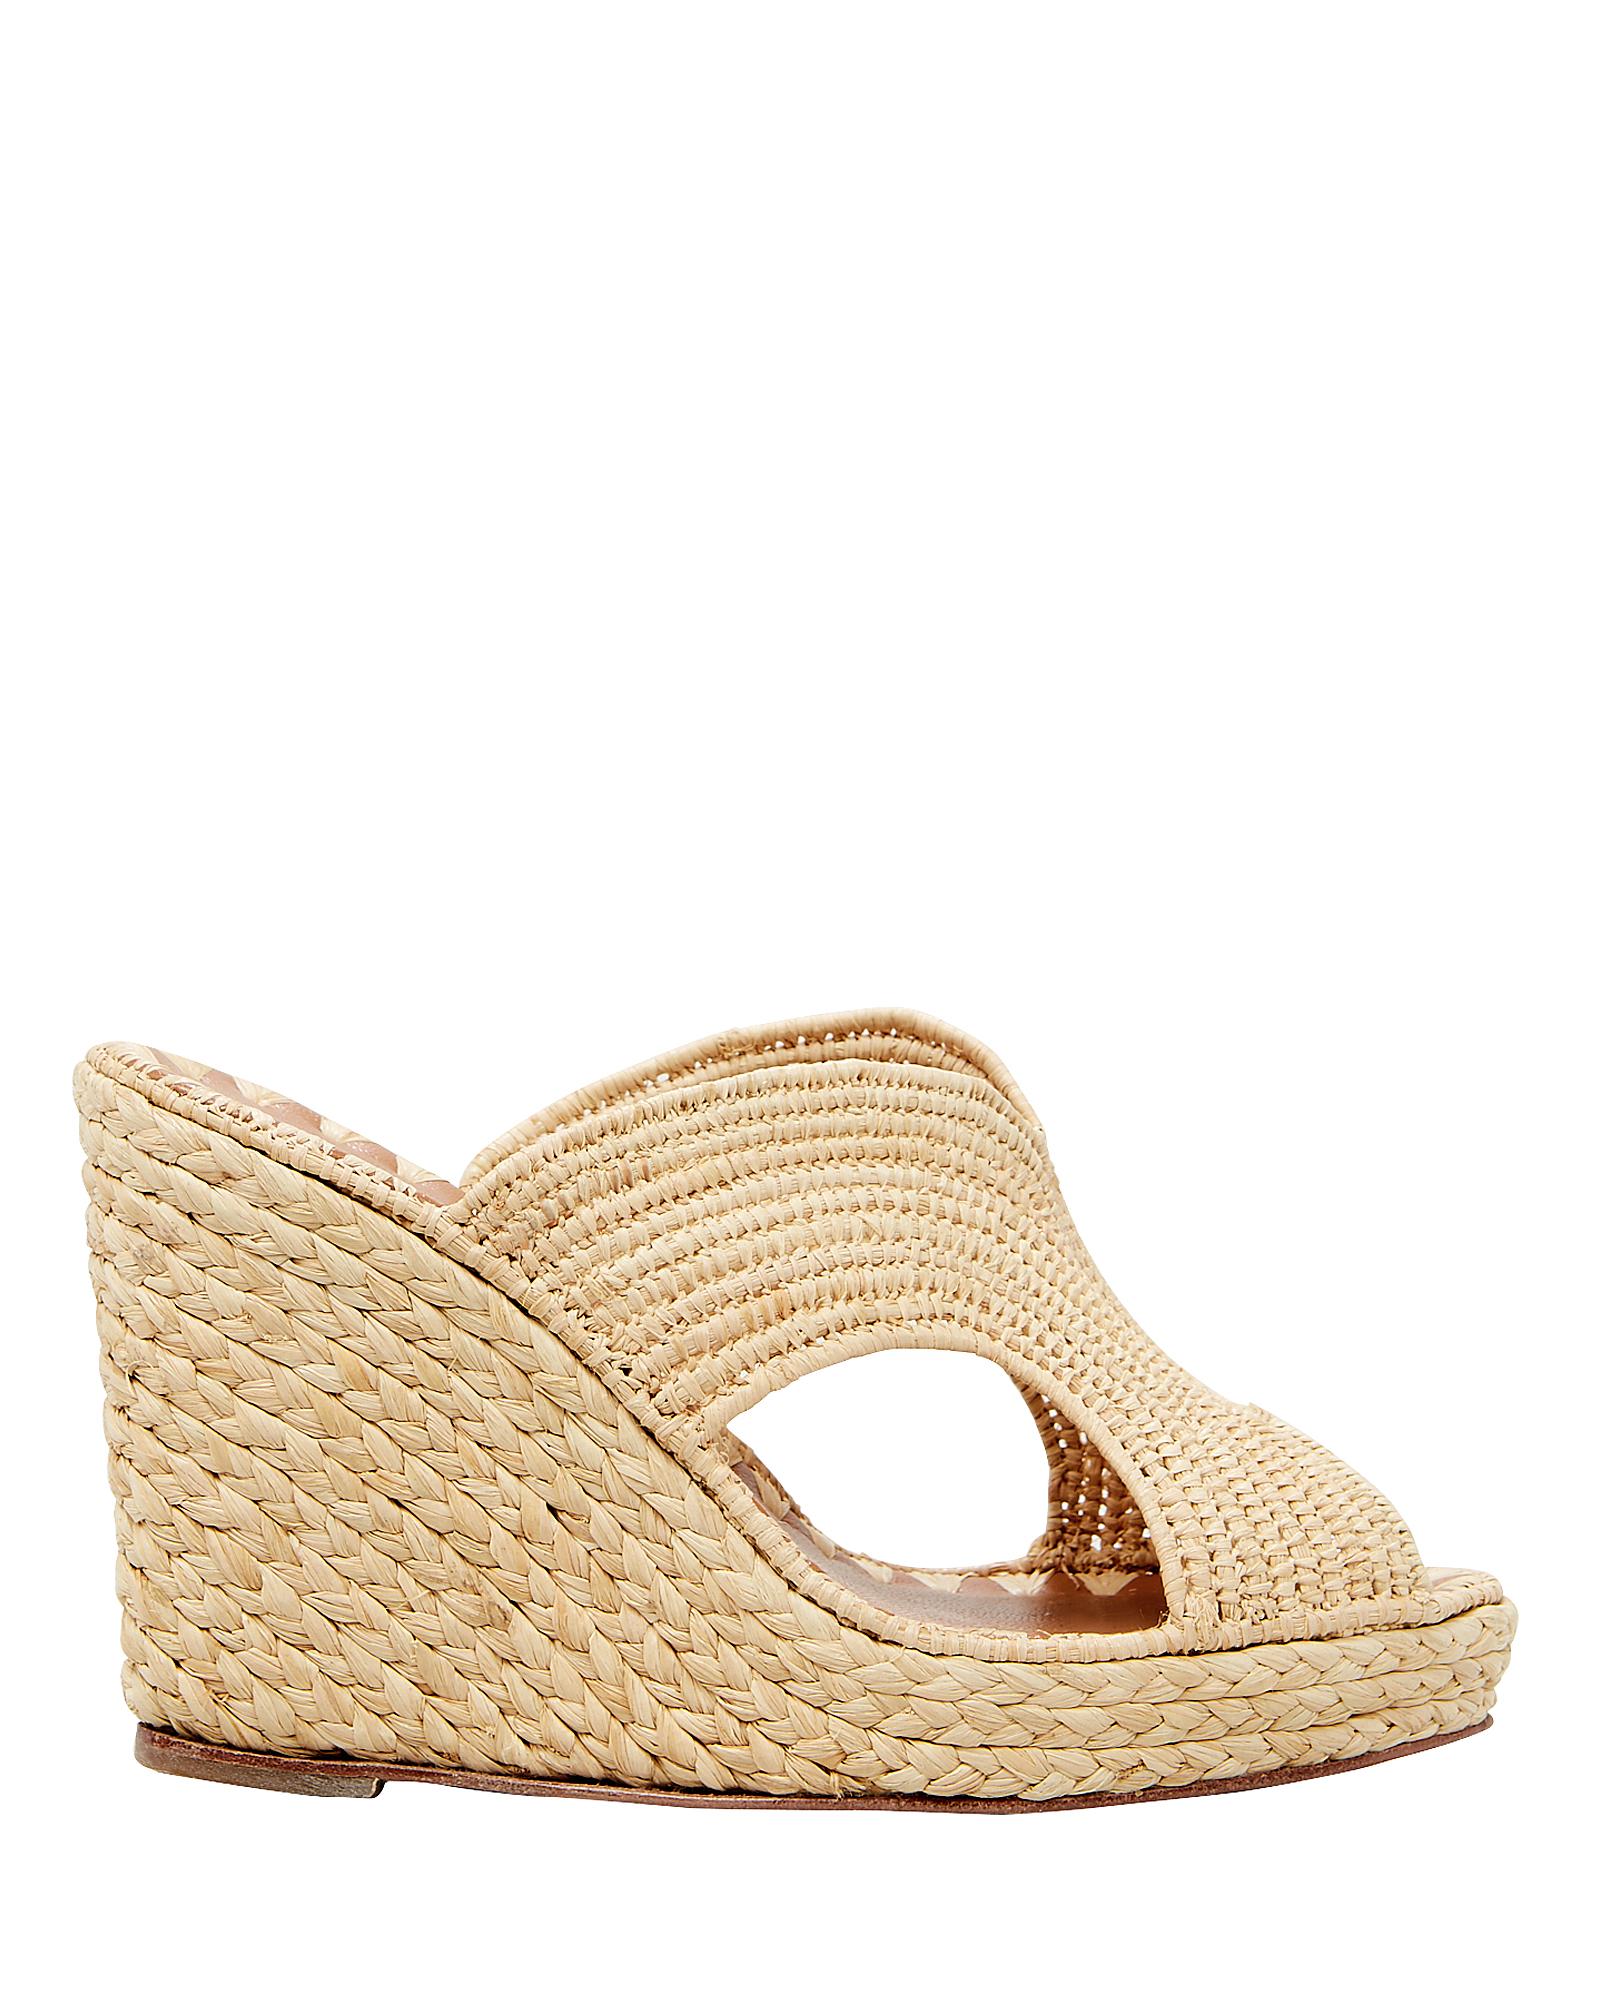 Carrie Forbes Lina Raffia Wedge Sandals in Natural | Lyst